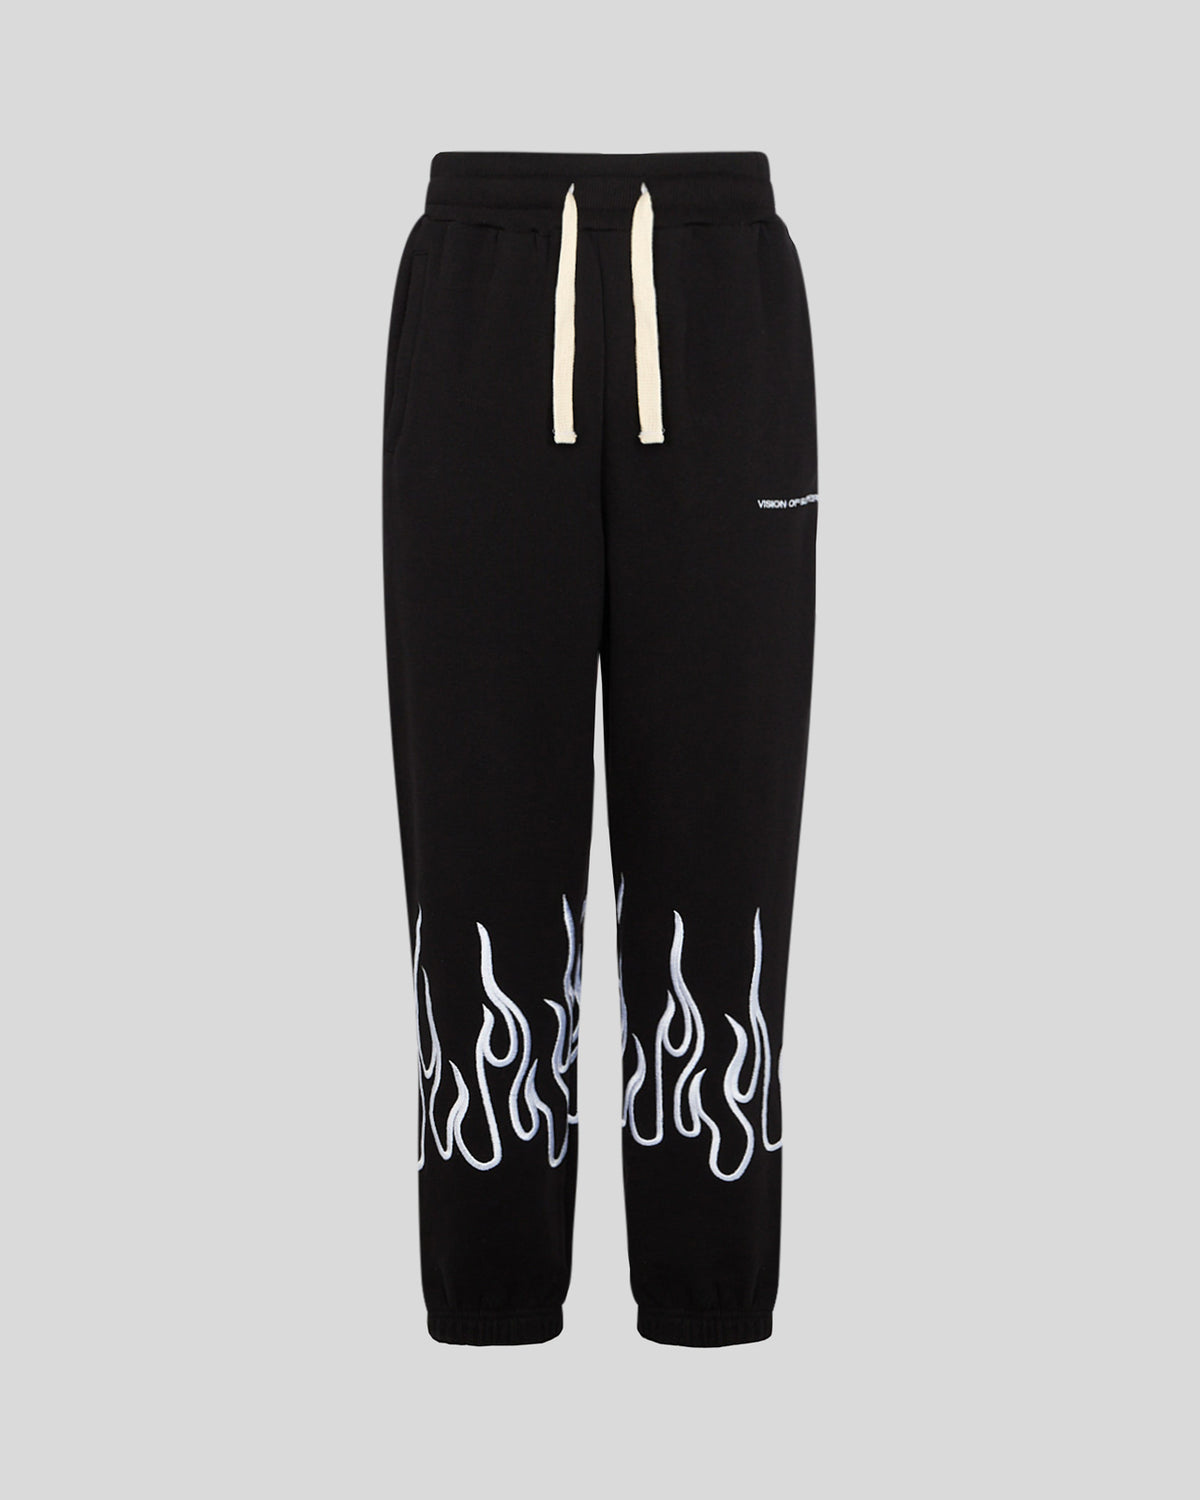 VISION OF SUPER BLACK PANTS WITH WHITE EMBROIDERED FLAMES